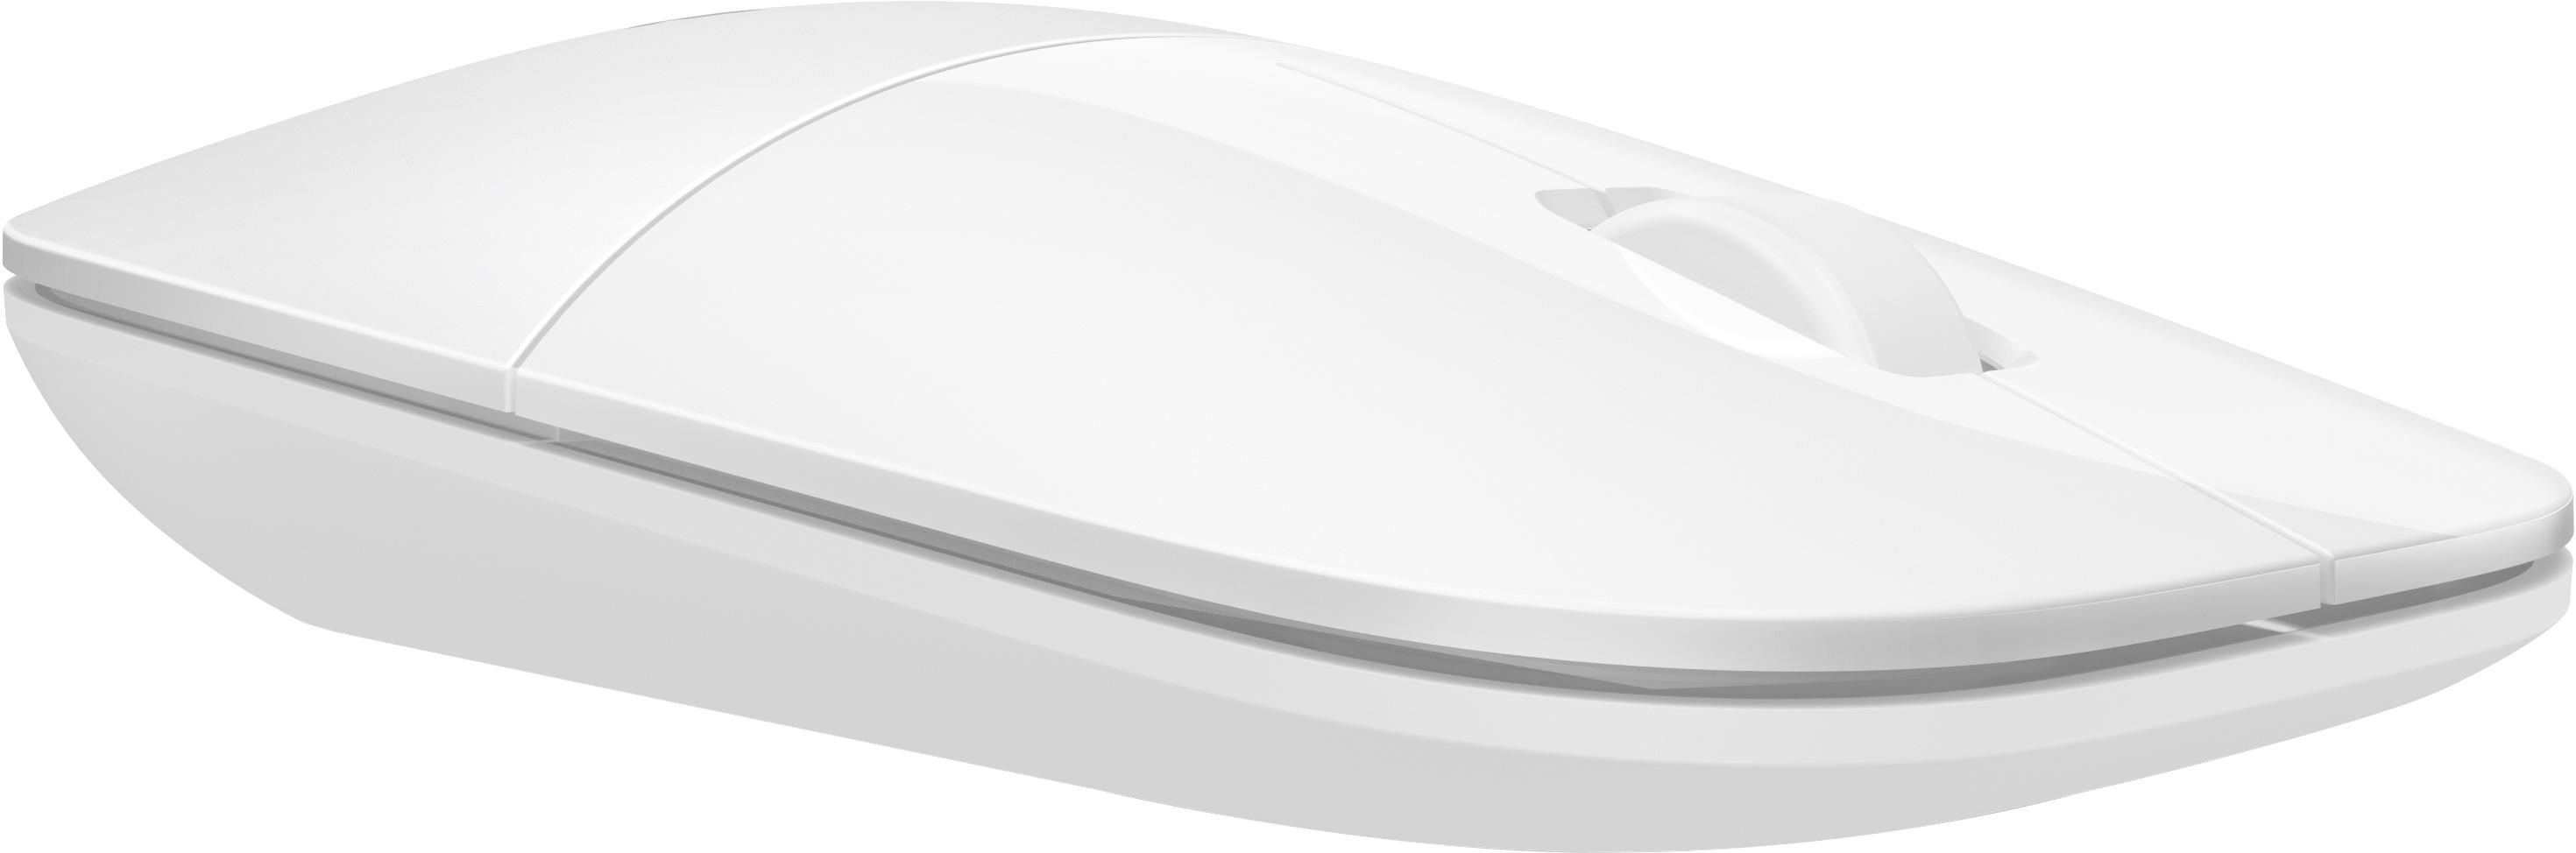 HP Z3700 Mouse wireless, Nero - Mouse